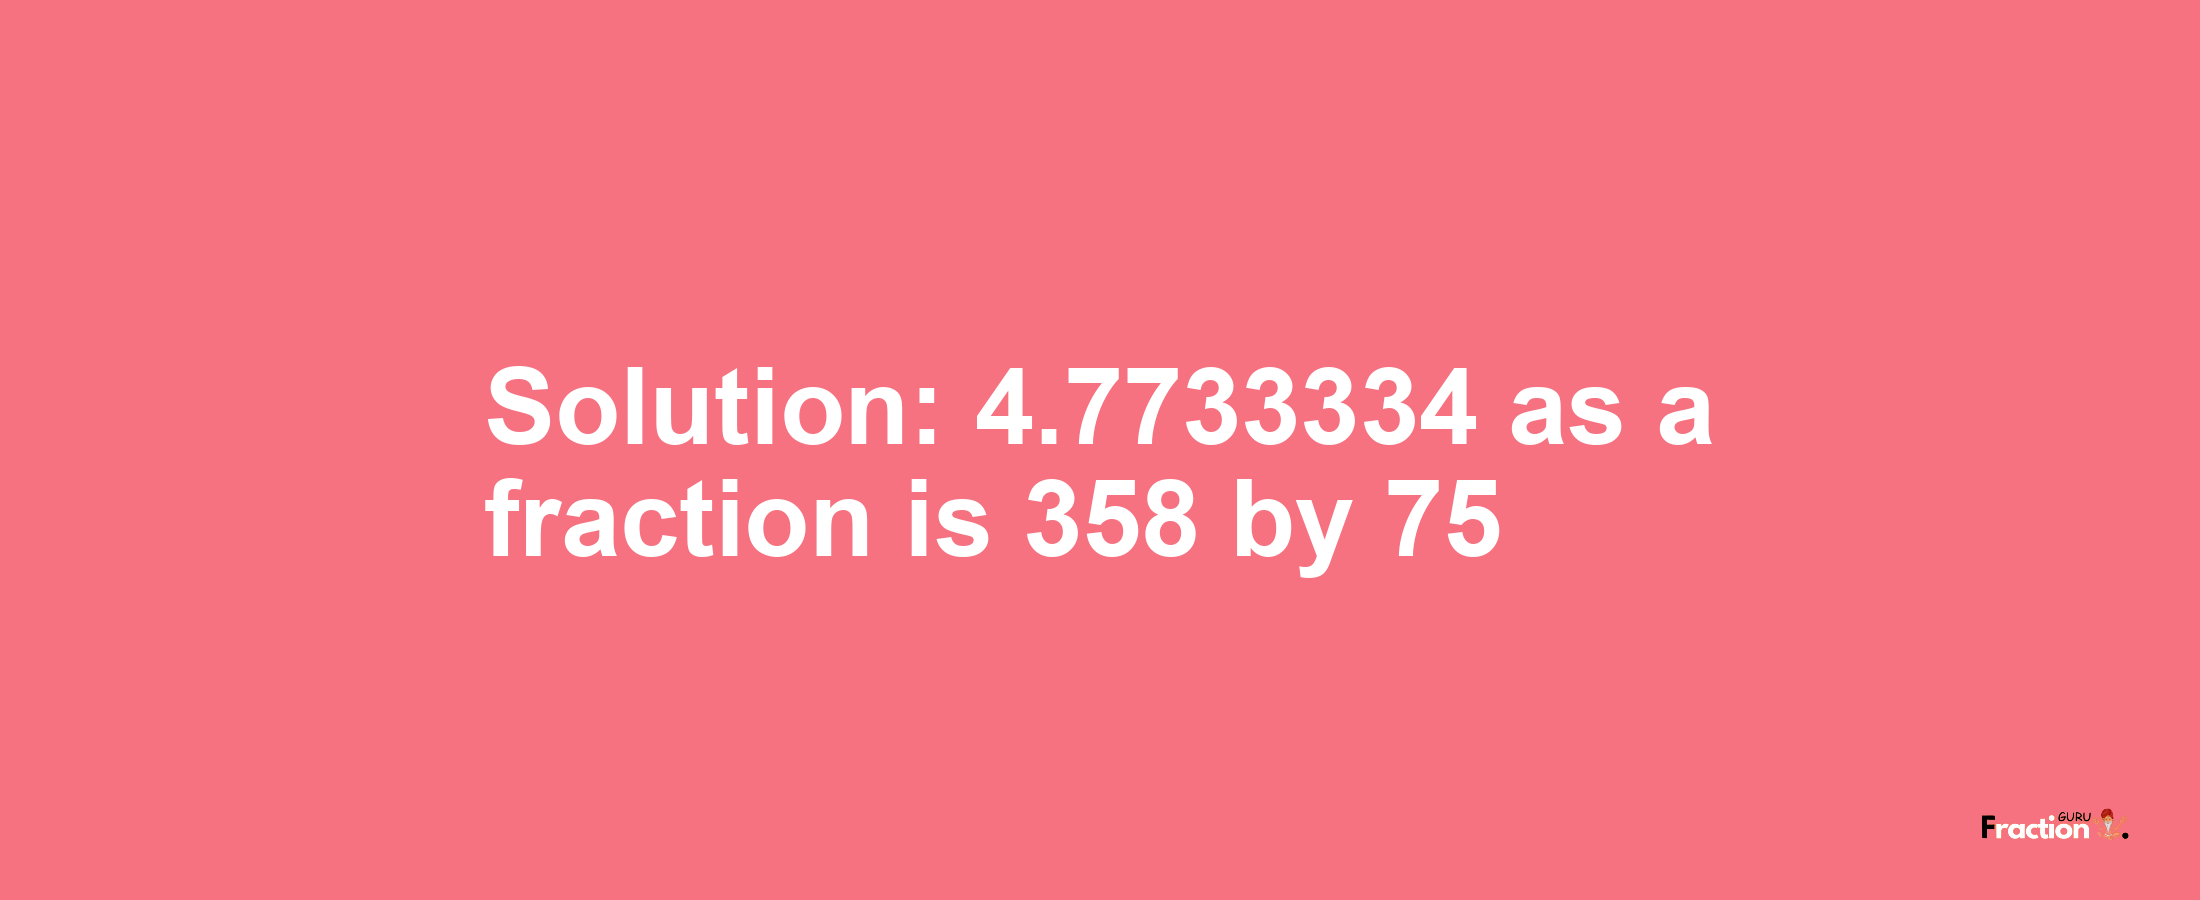 Solution:4.7733334 as a fraction is 358/75